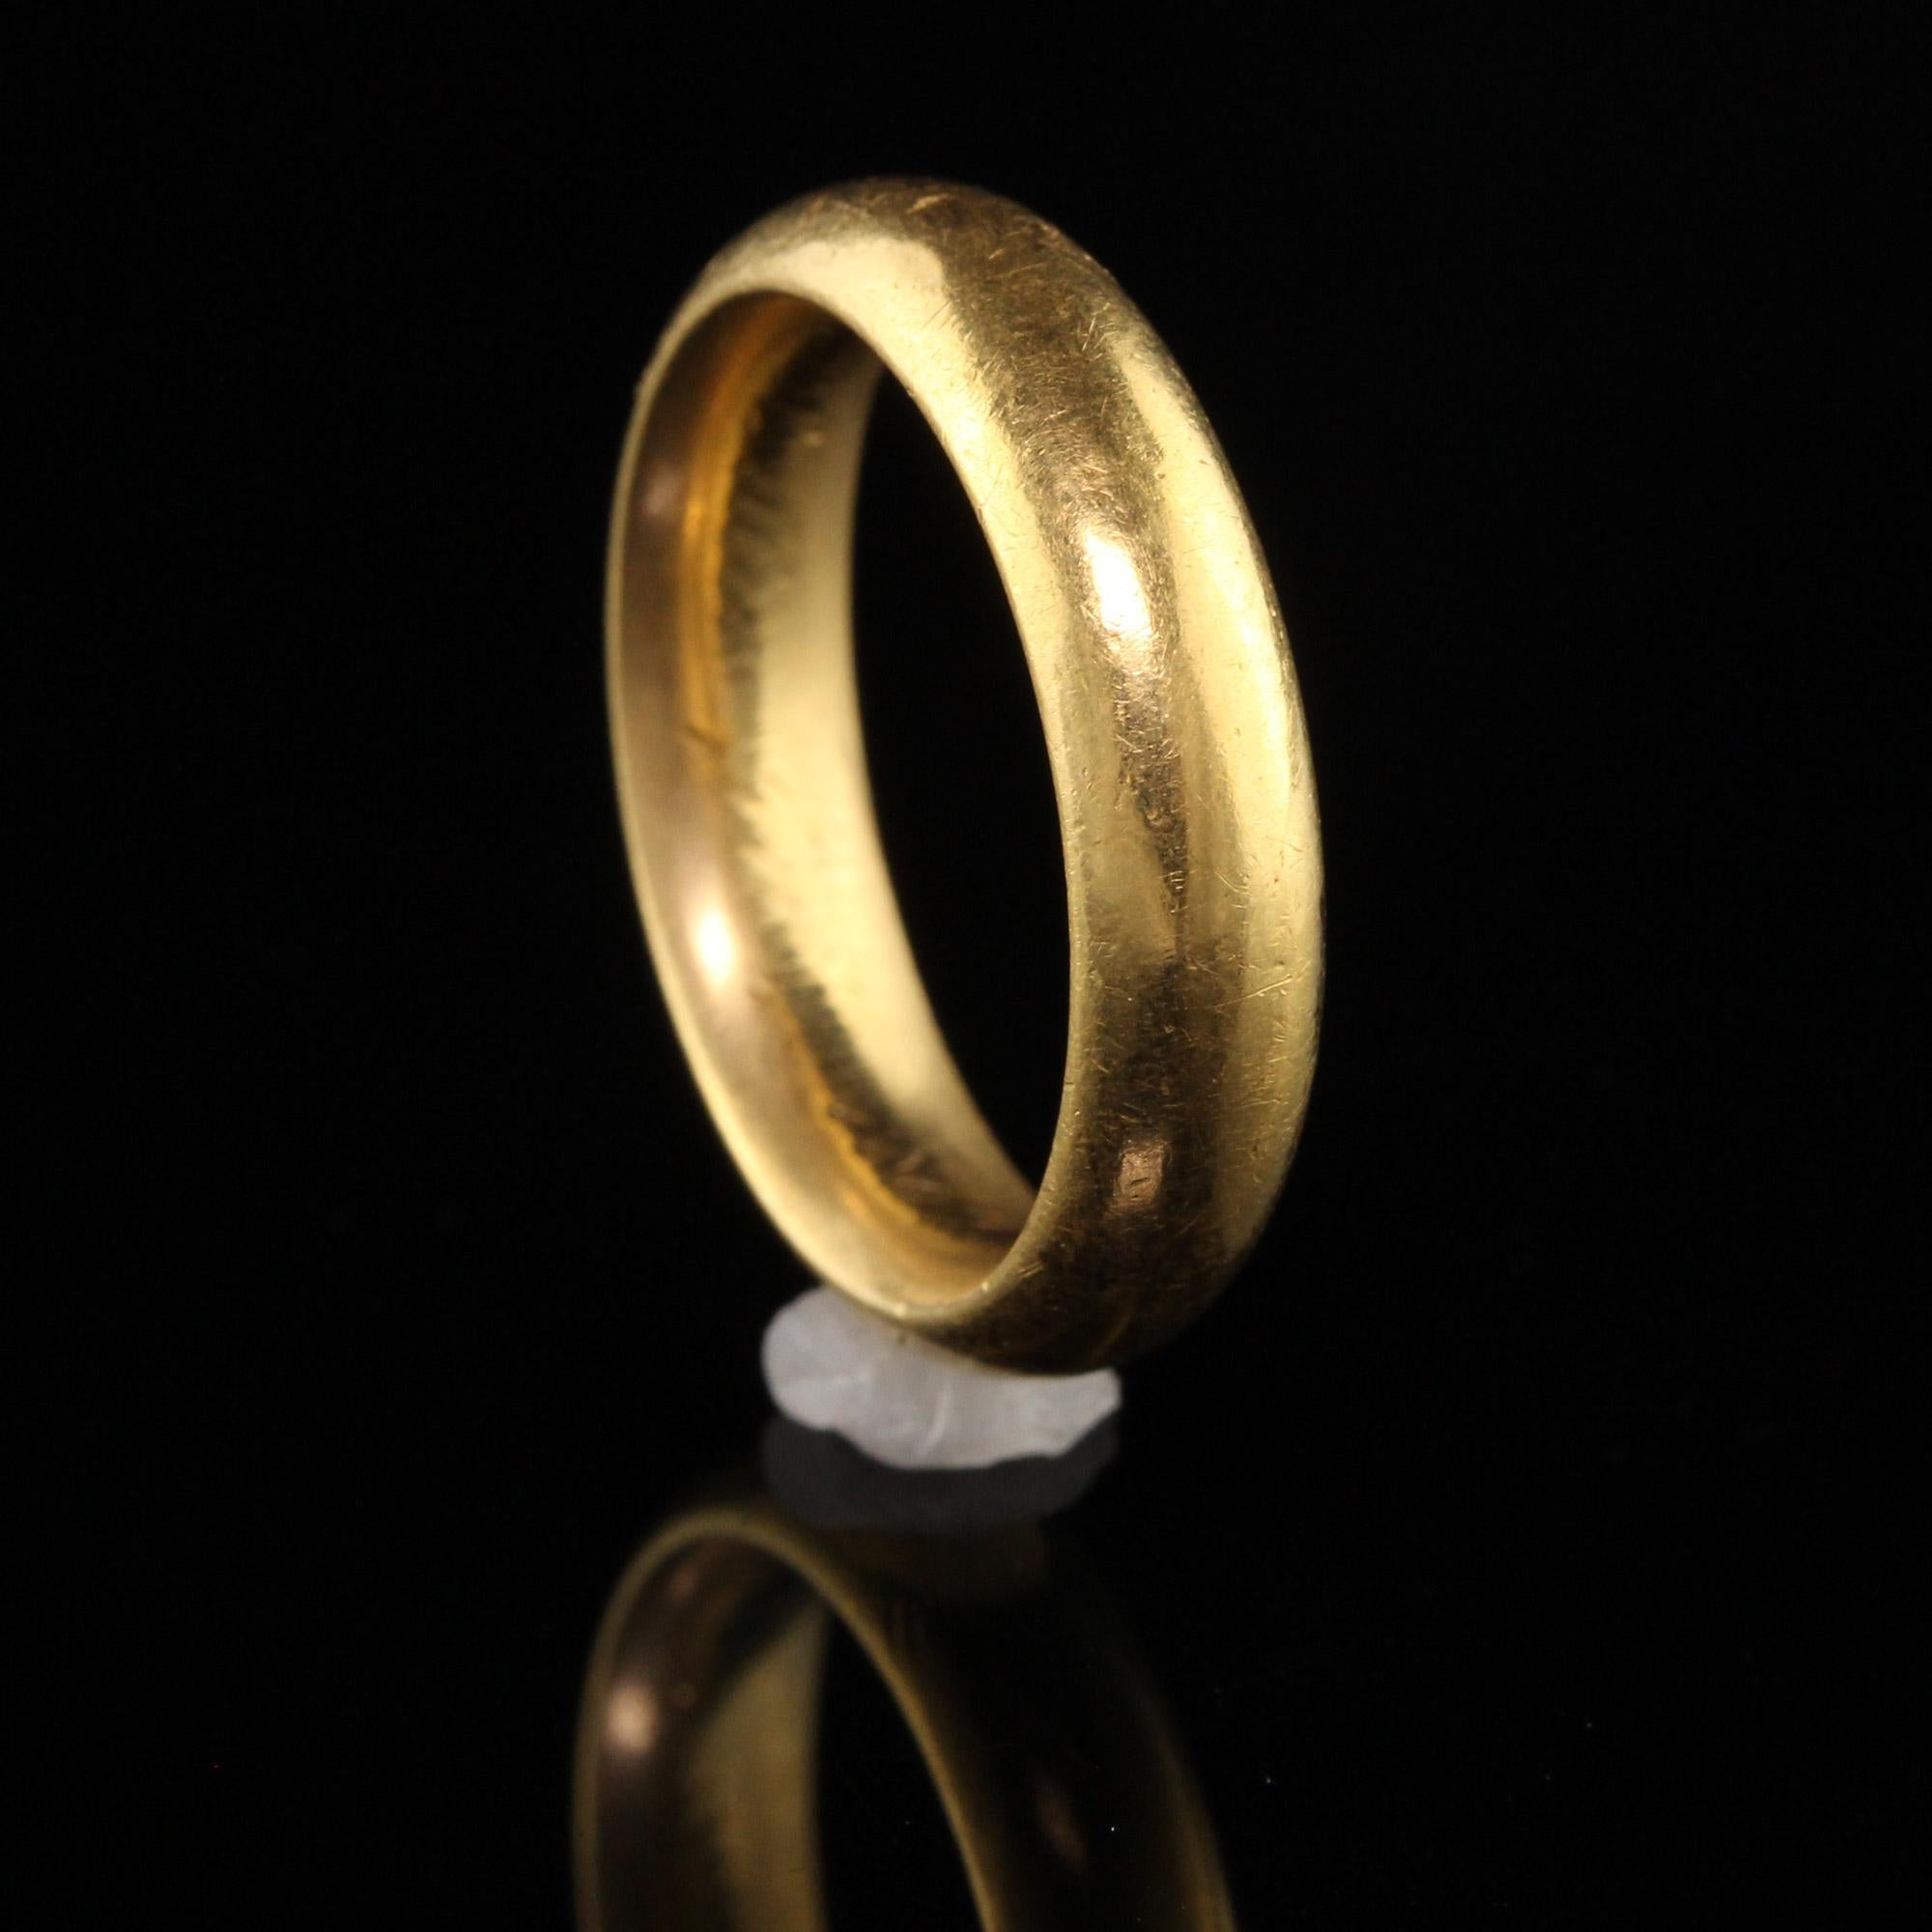 Antique Victorian 18k Yellow Gold Plain Wide Engraved Wedding Band 1